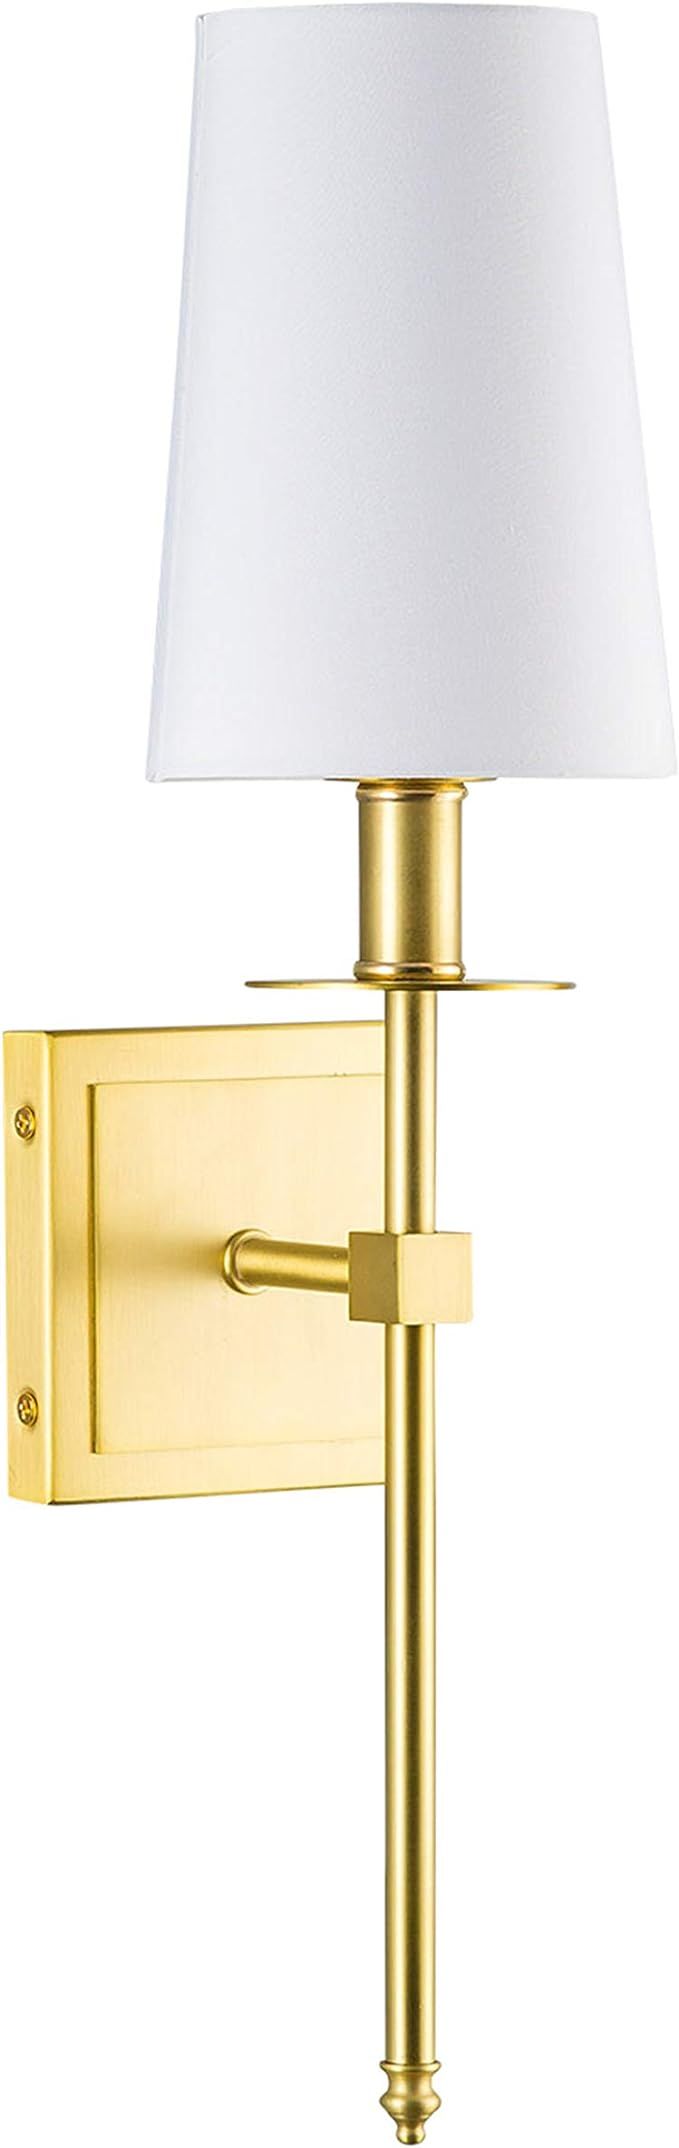 Torcia Wall Sconce Slim 1 Light Fixture with Fabric Shade | Brushed Brass Vanity Light LL-SC425-A... | Amazon (US)